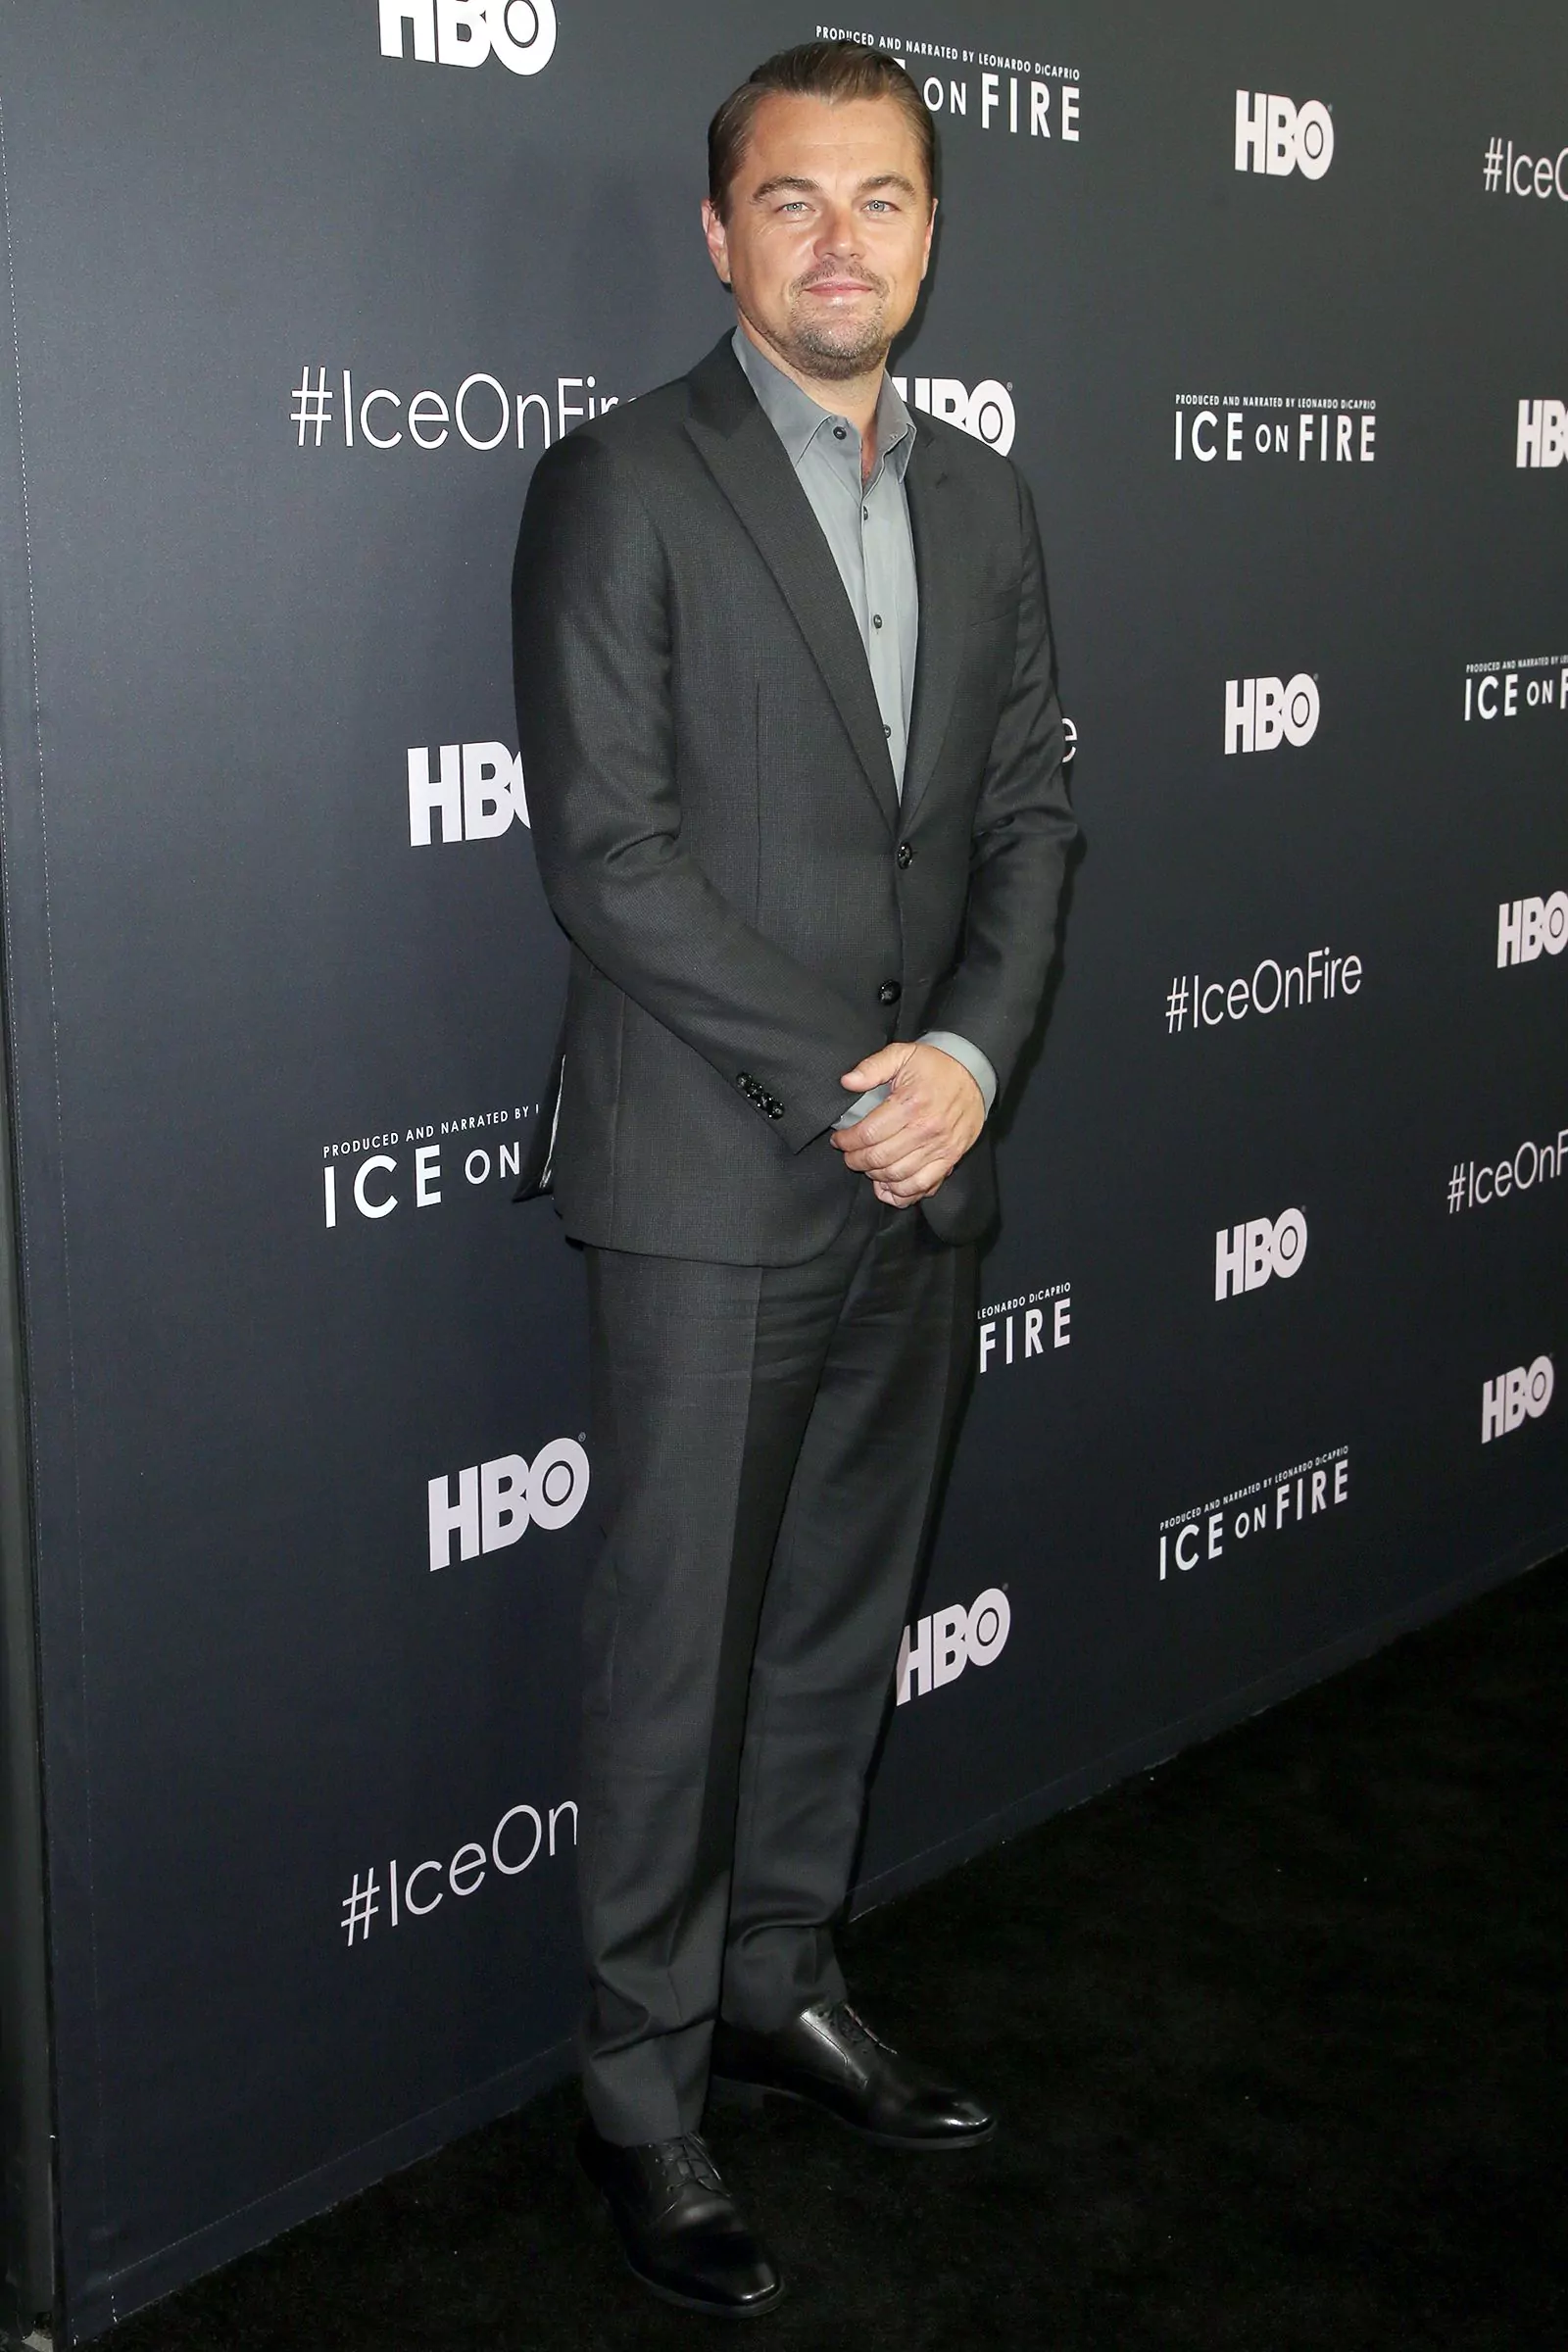 Leonardo DiCaprio at the premiere of Ice on Fire in Los Angeles, June 6, 2019.